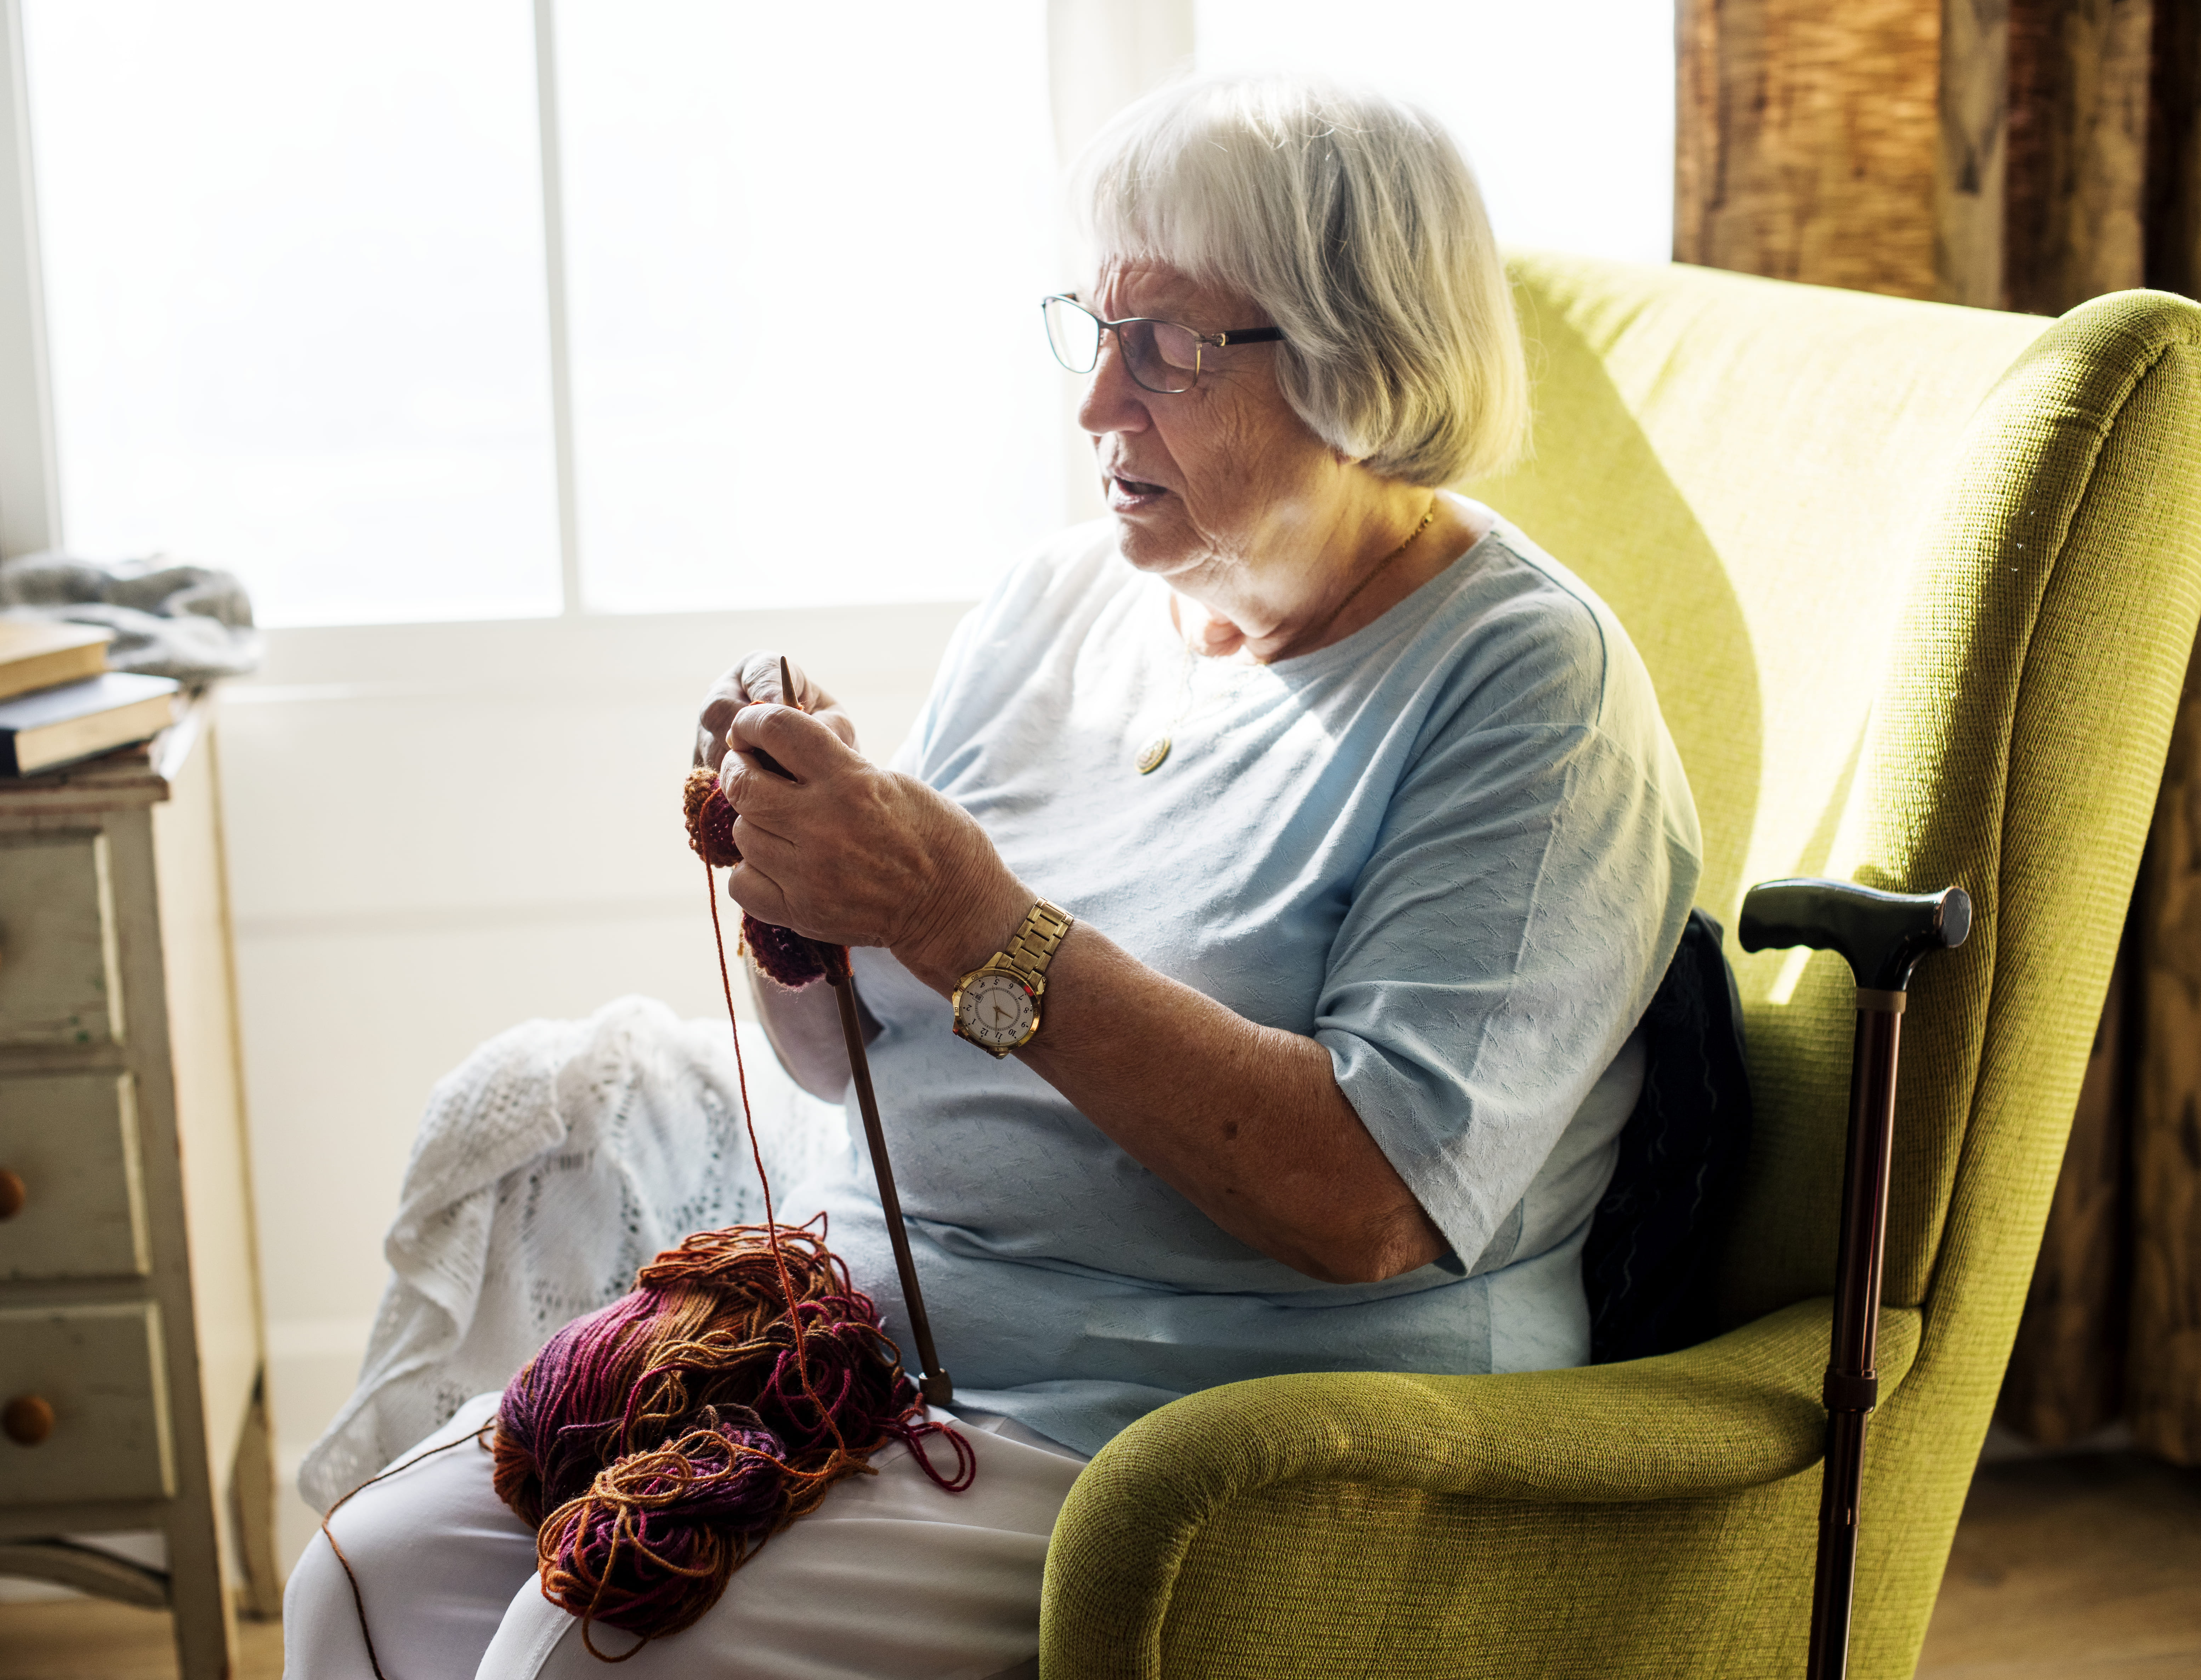 Woman sitting in a chair knitting.